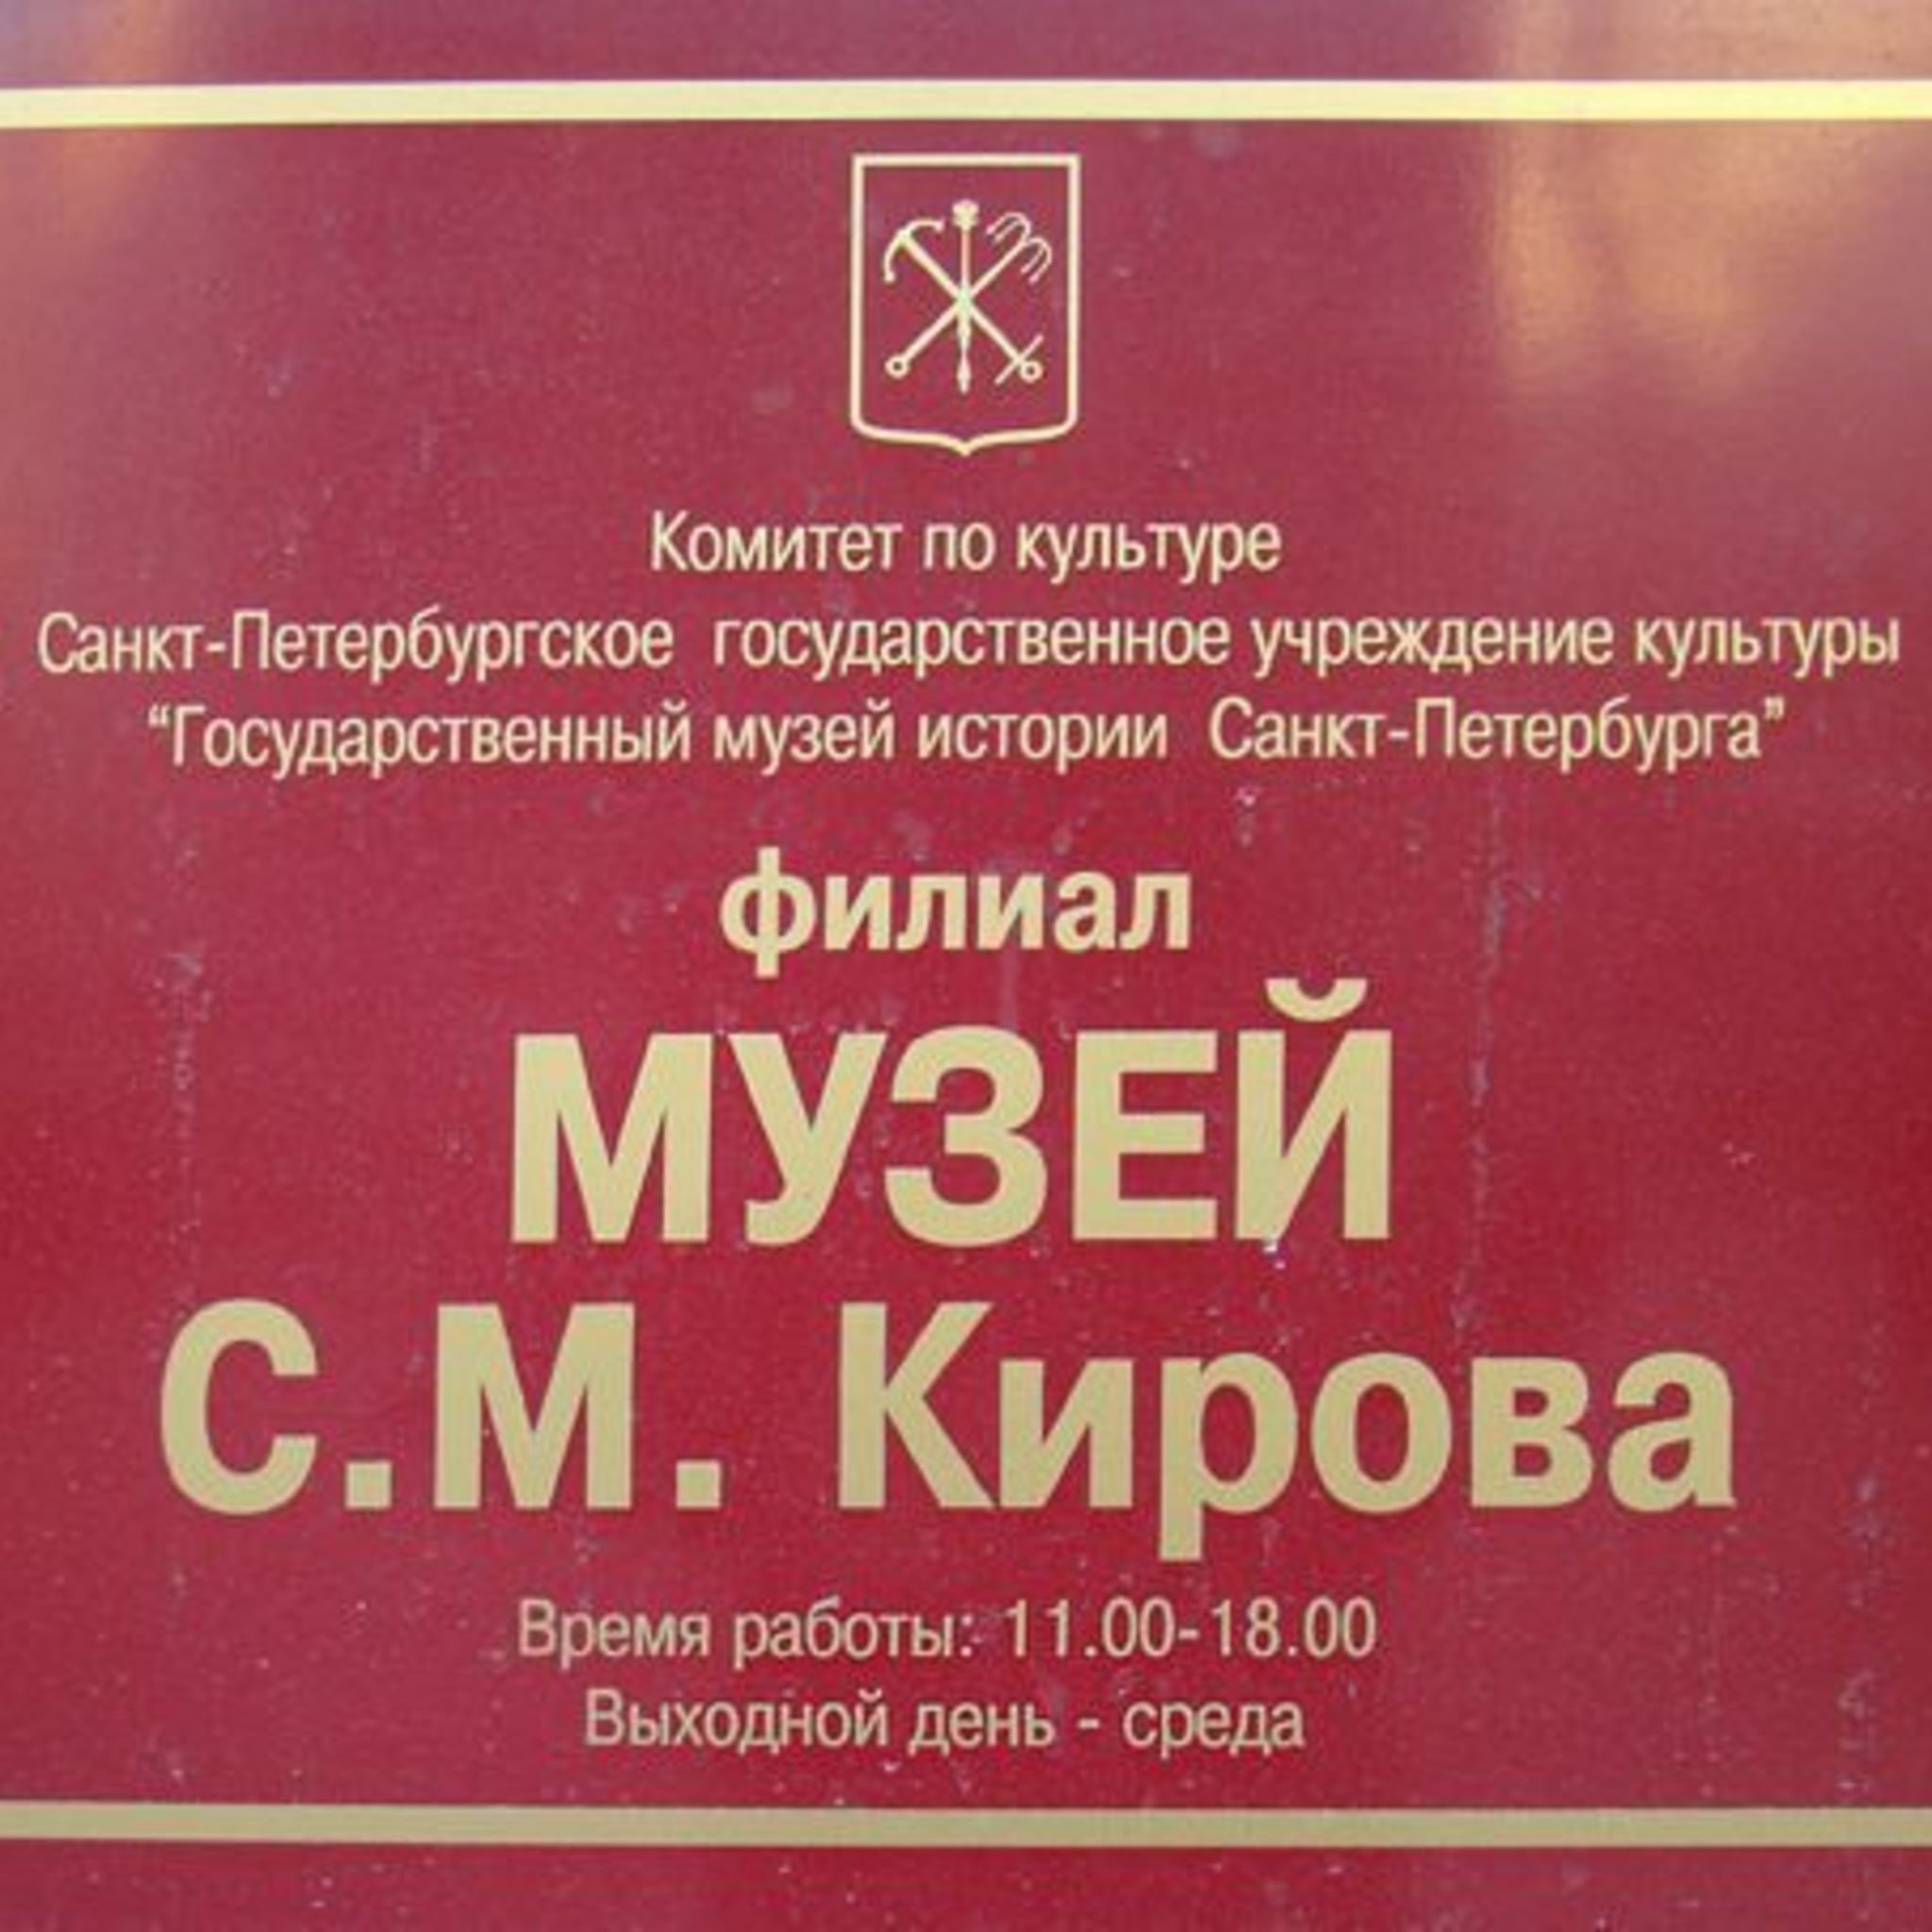 Schedule of events on December 2015 at the Museum of SM Kirov